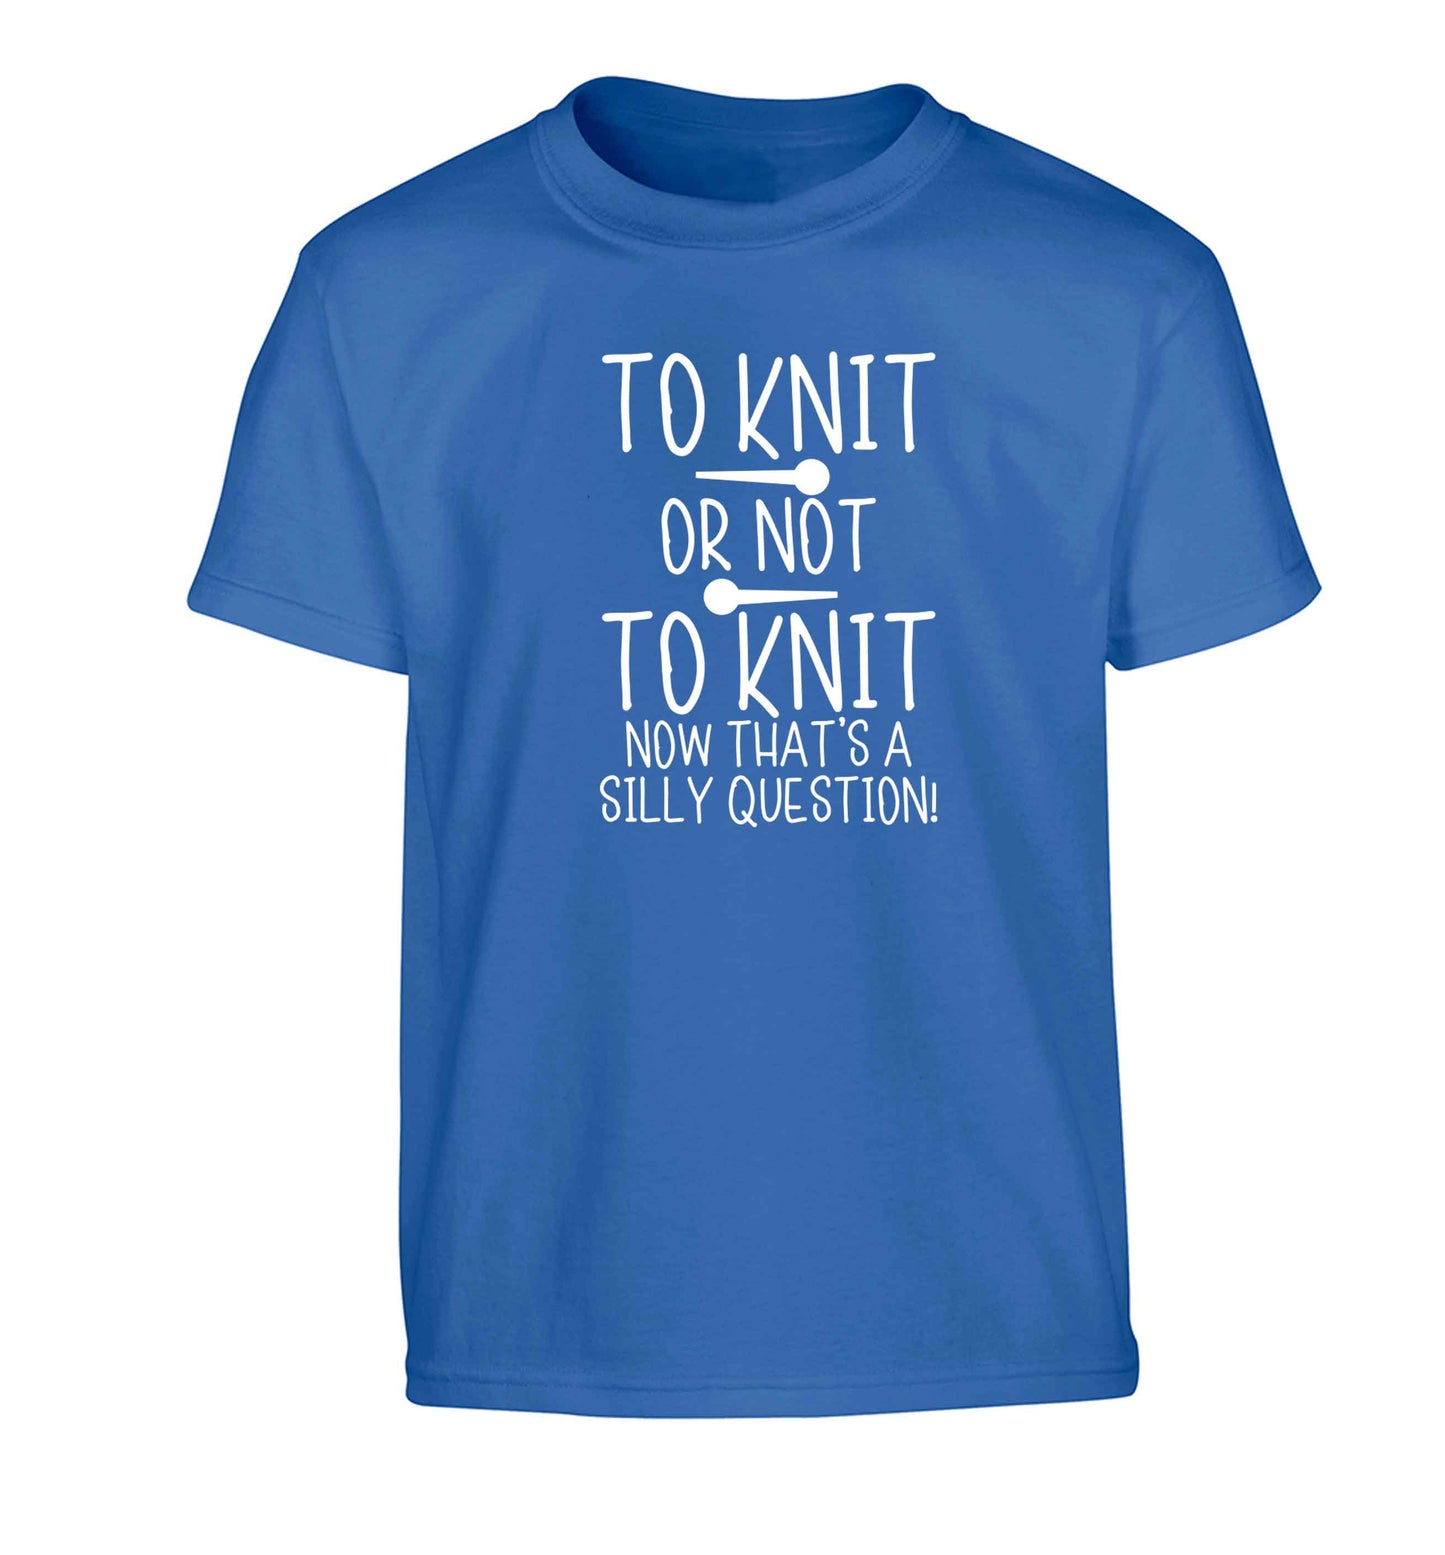 To knit or not to knit now that's a silly question Children's blue Tshirt 12-13 Years